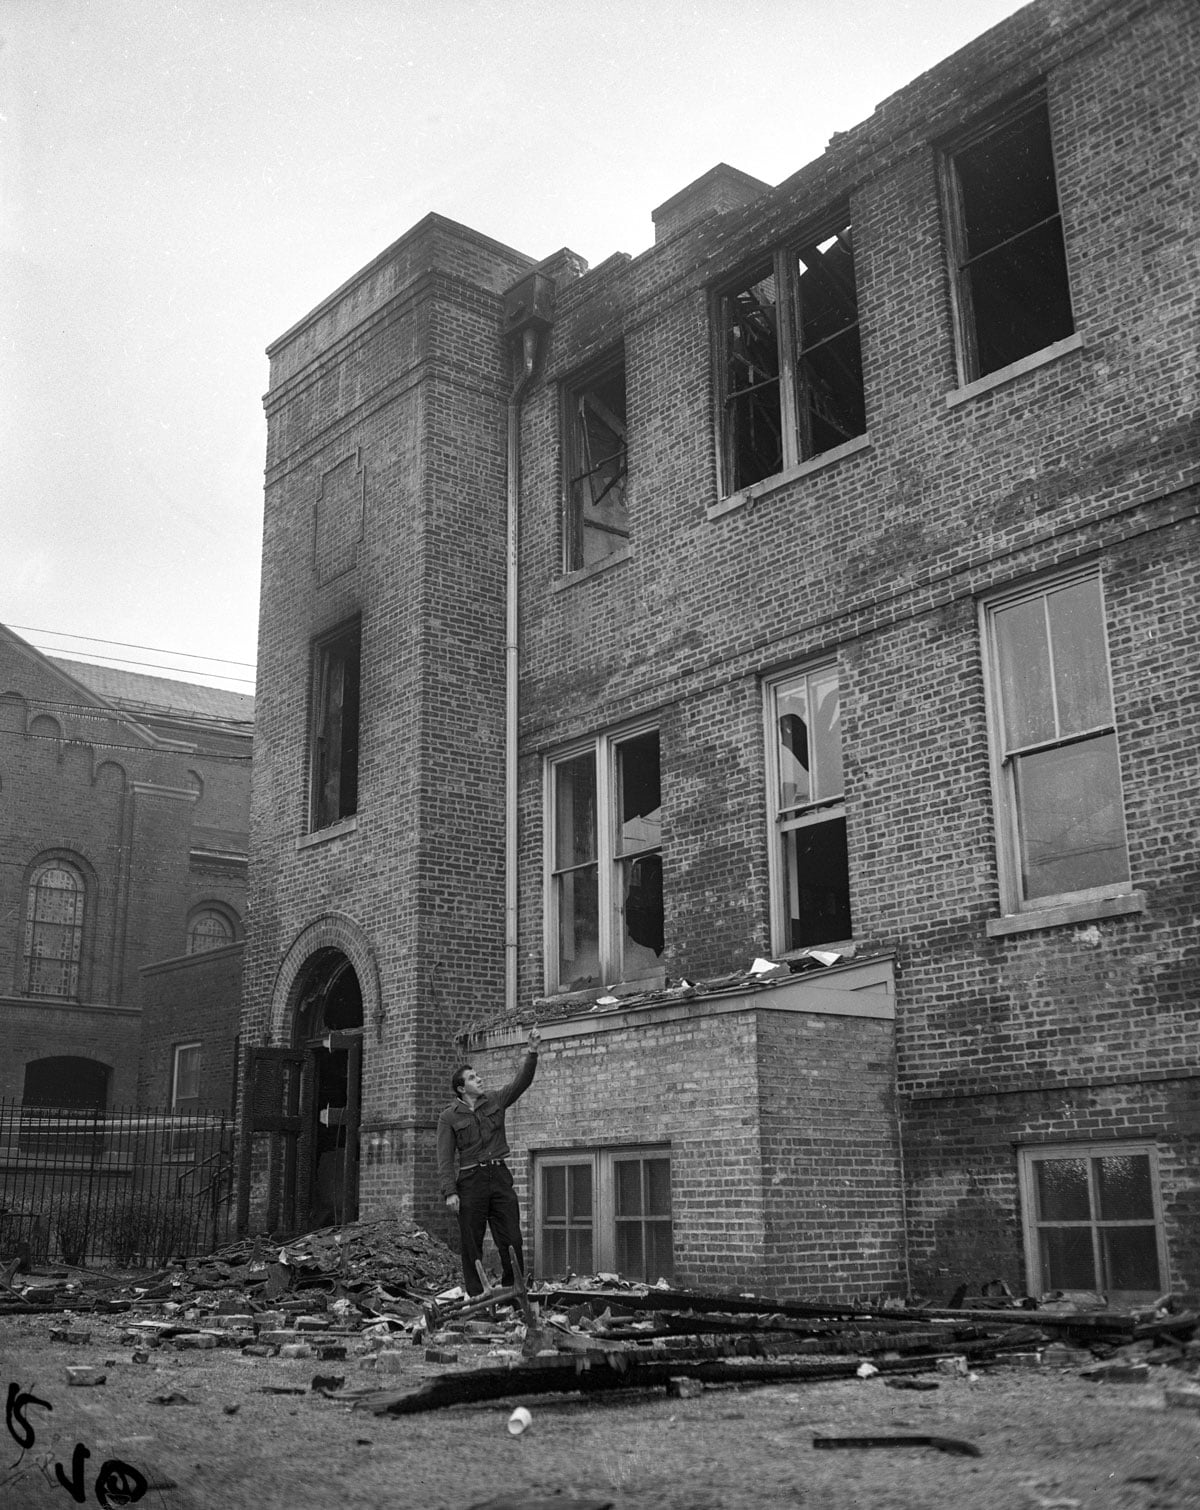 The damaged building after the fire